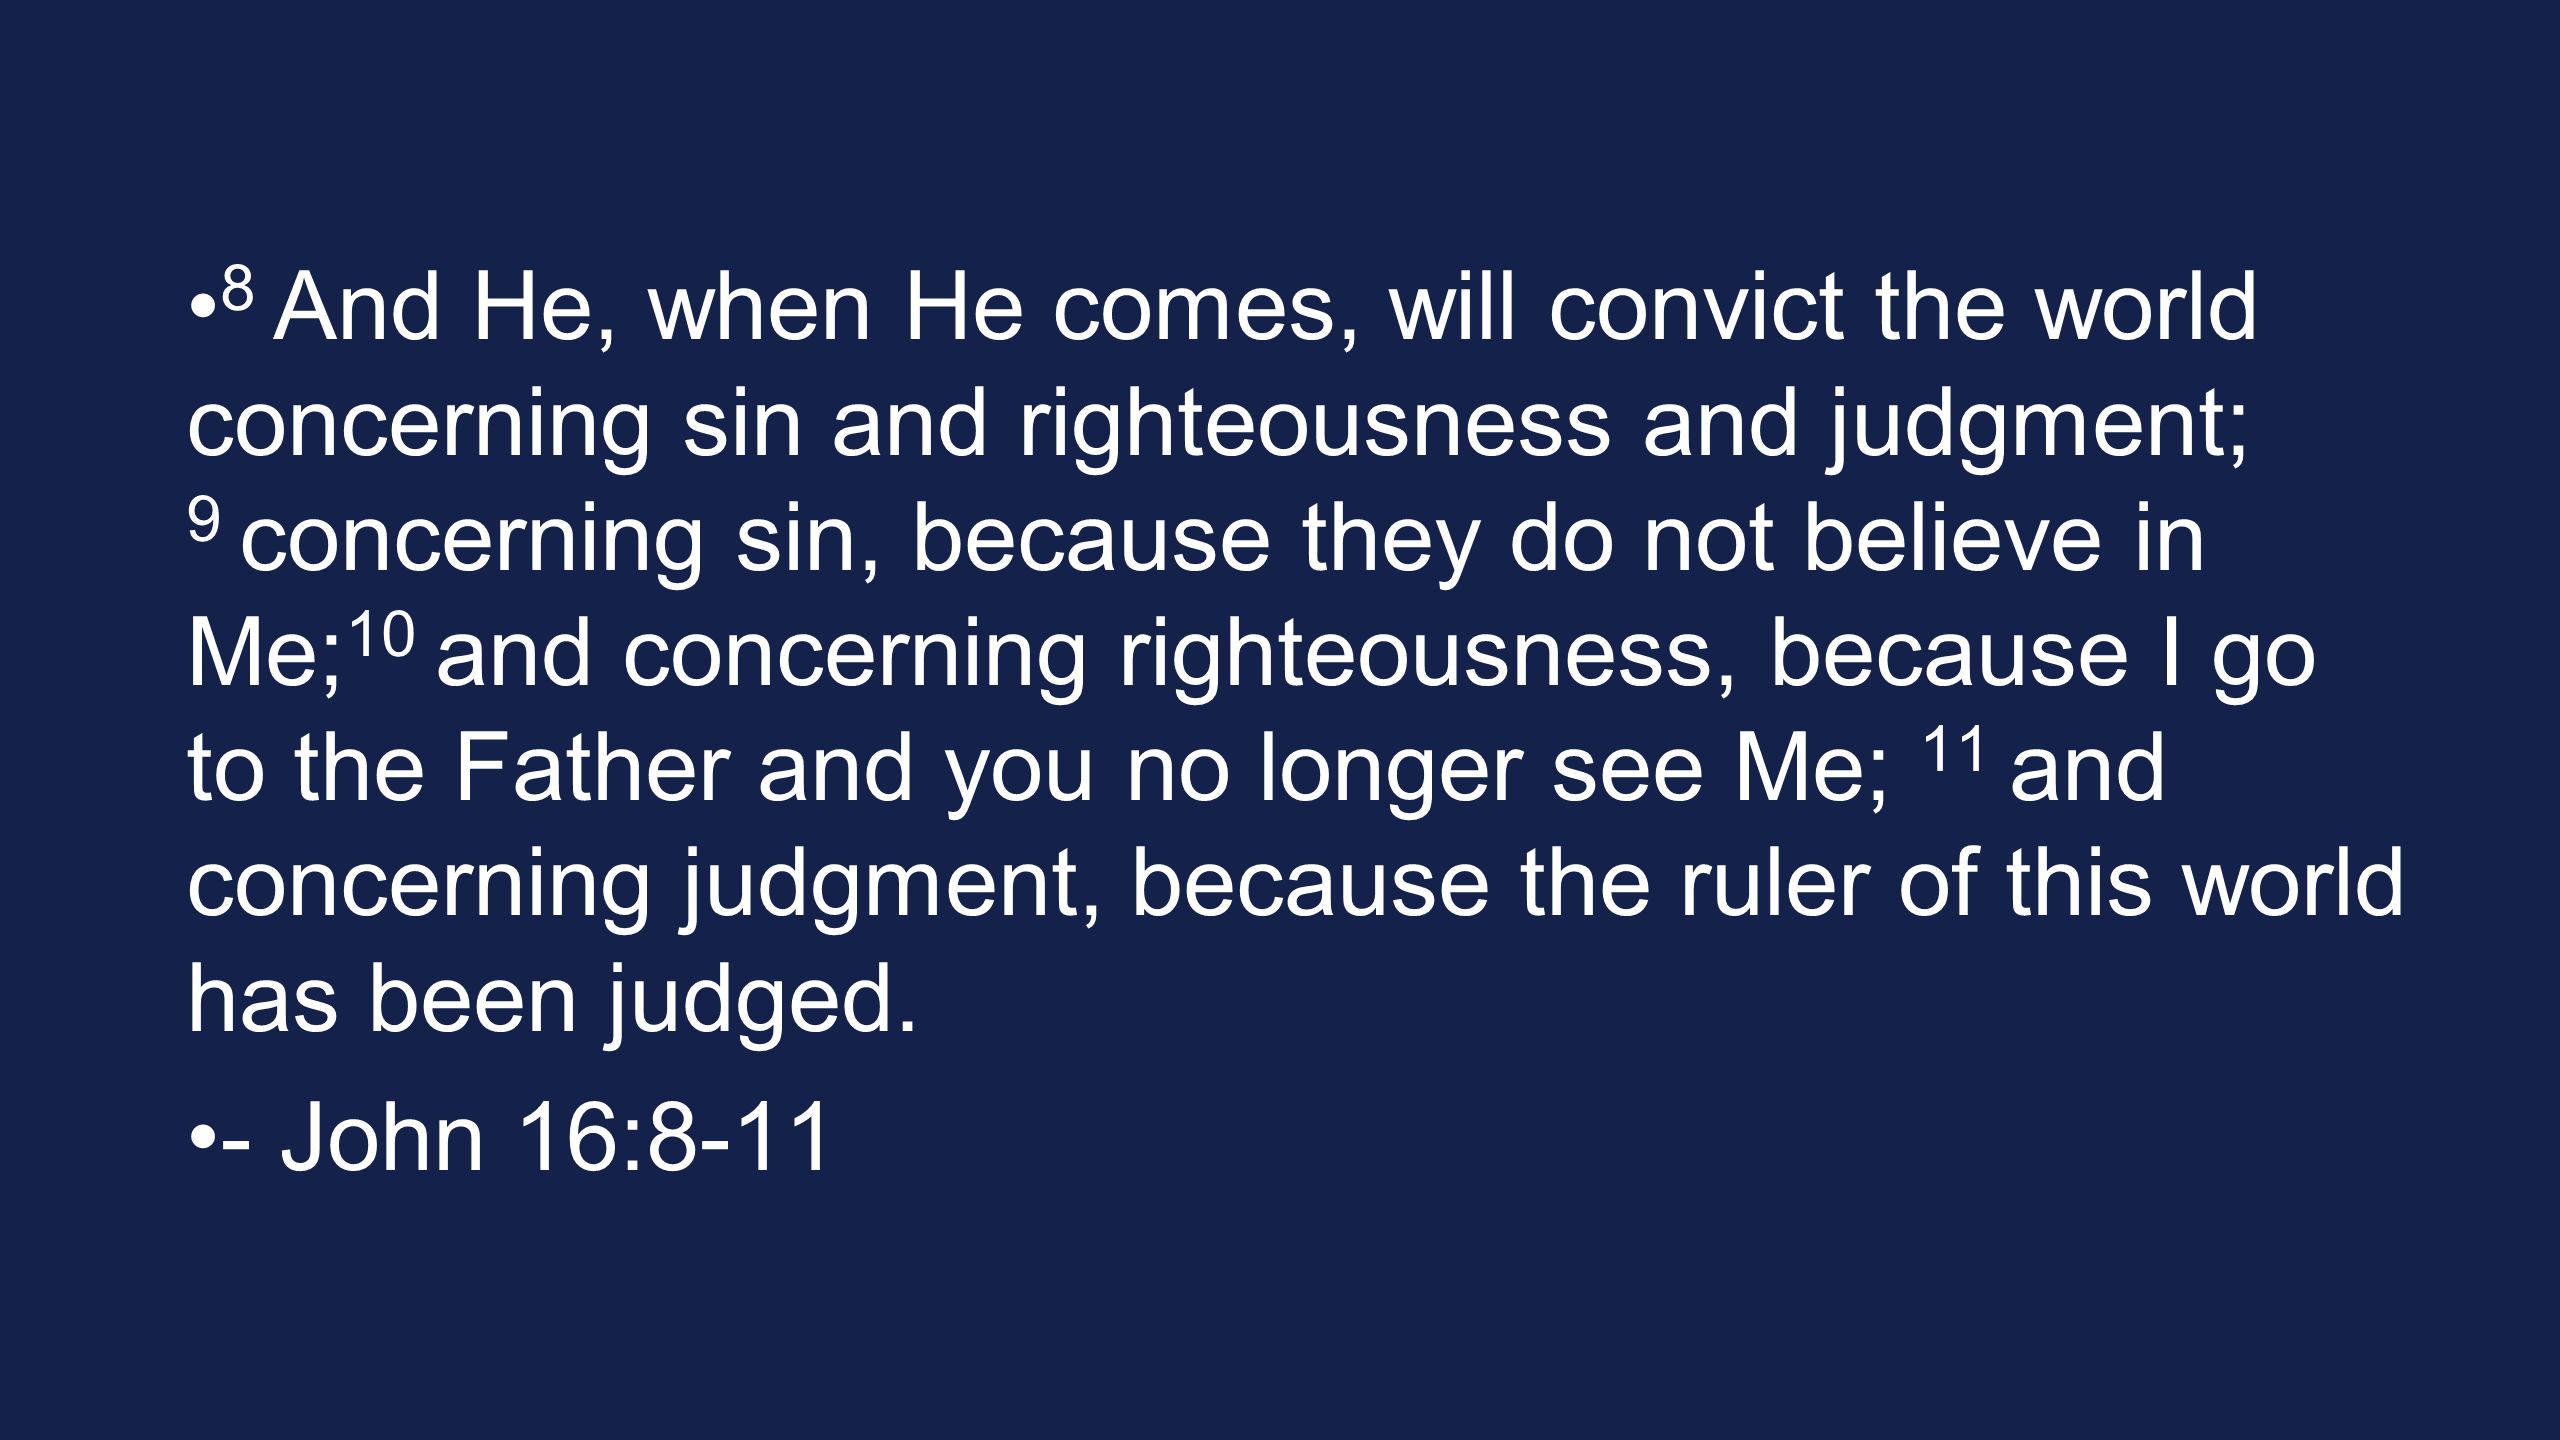 8 And He, when He comes, will convict the world concerning sin and righteousness and judgment; 9 concerning sin, because they do not believe in Me; 10 and concerning righteousness, because I go to the Father and you no longer see Me; 11 and concerning judgment, because the ruler of this world has been judged.